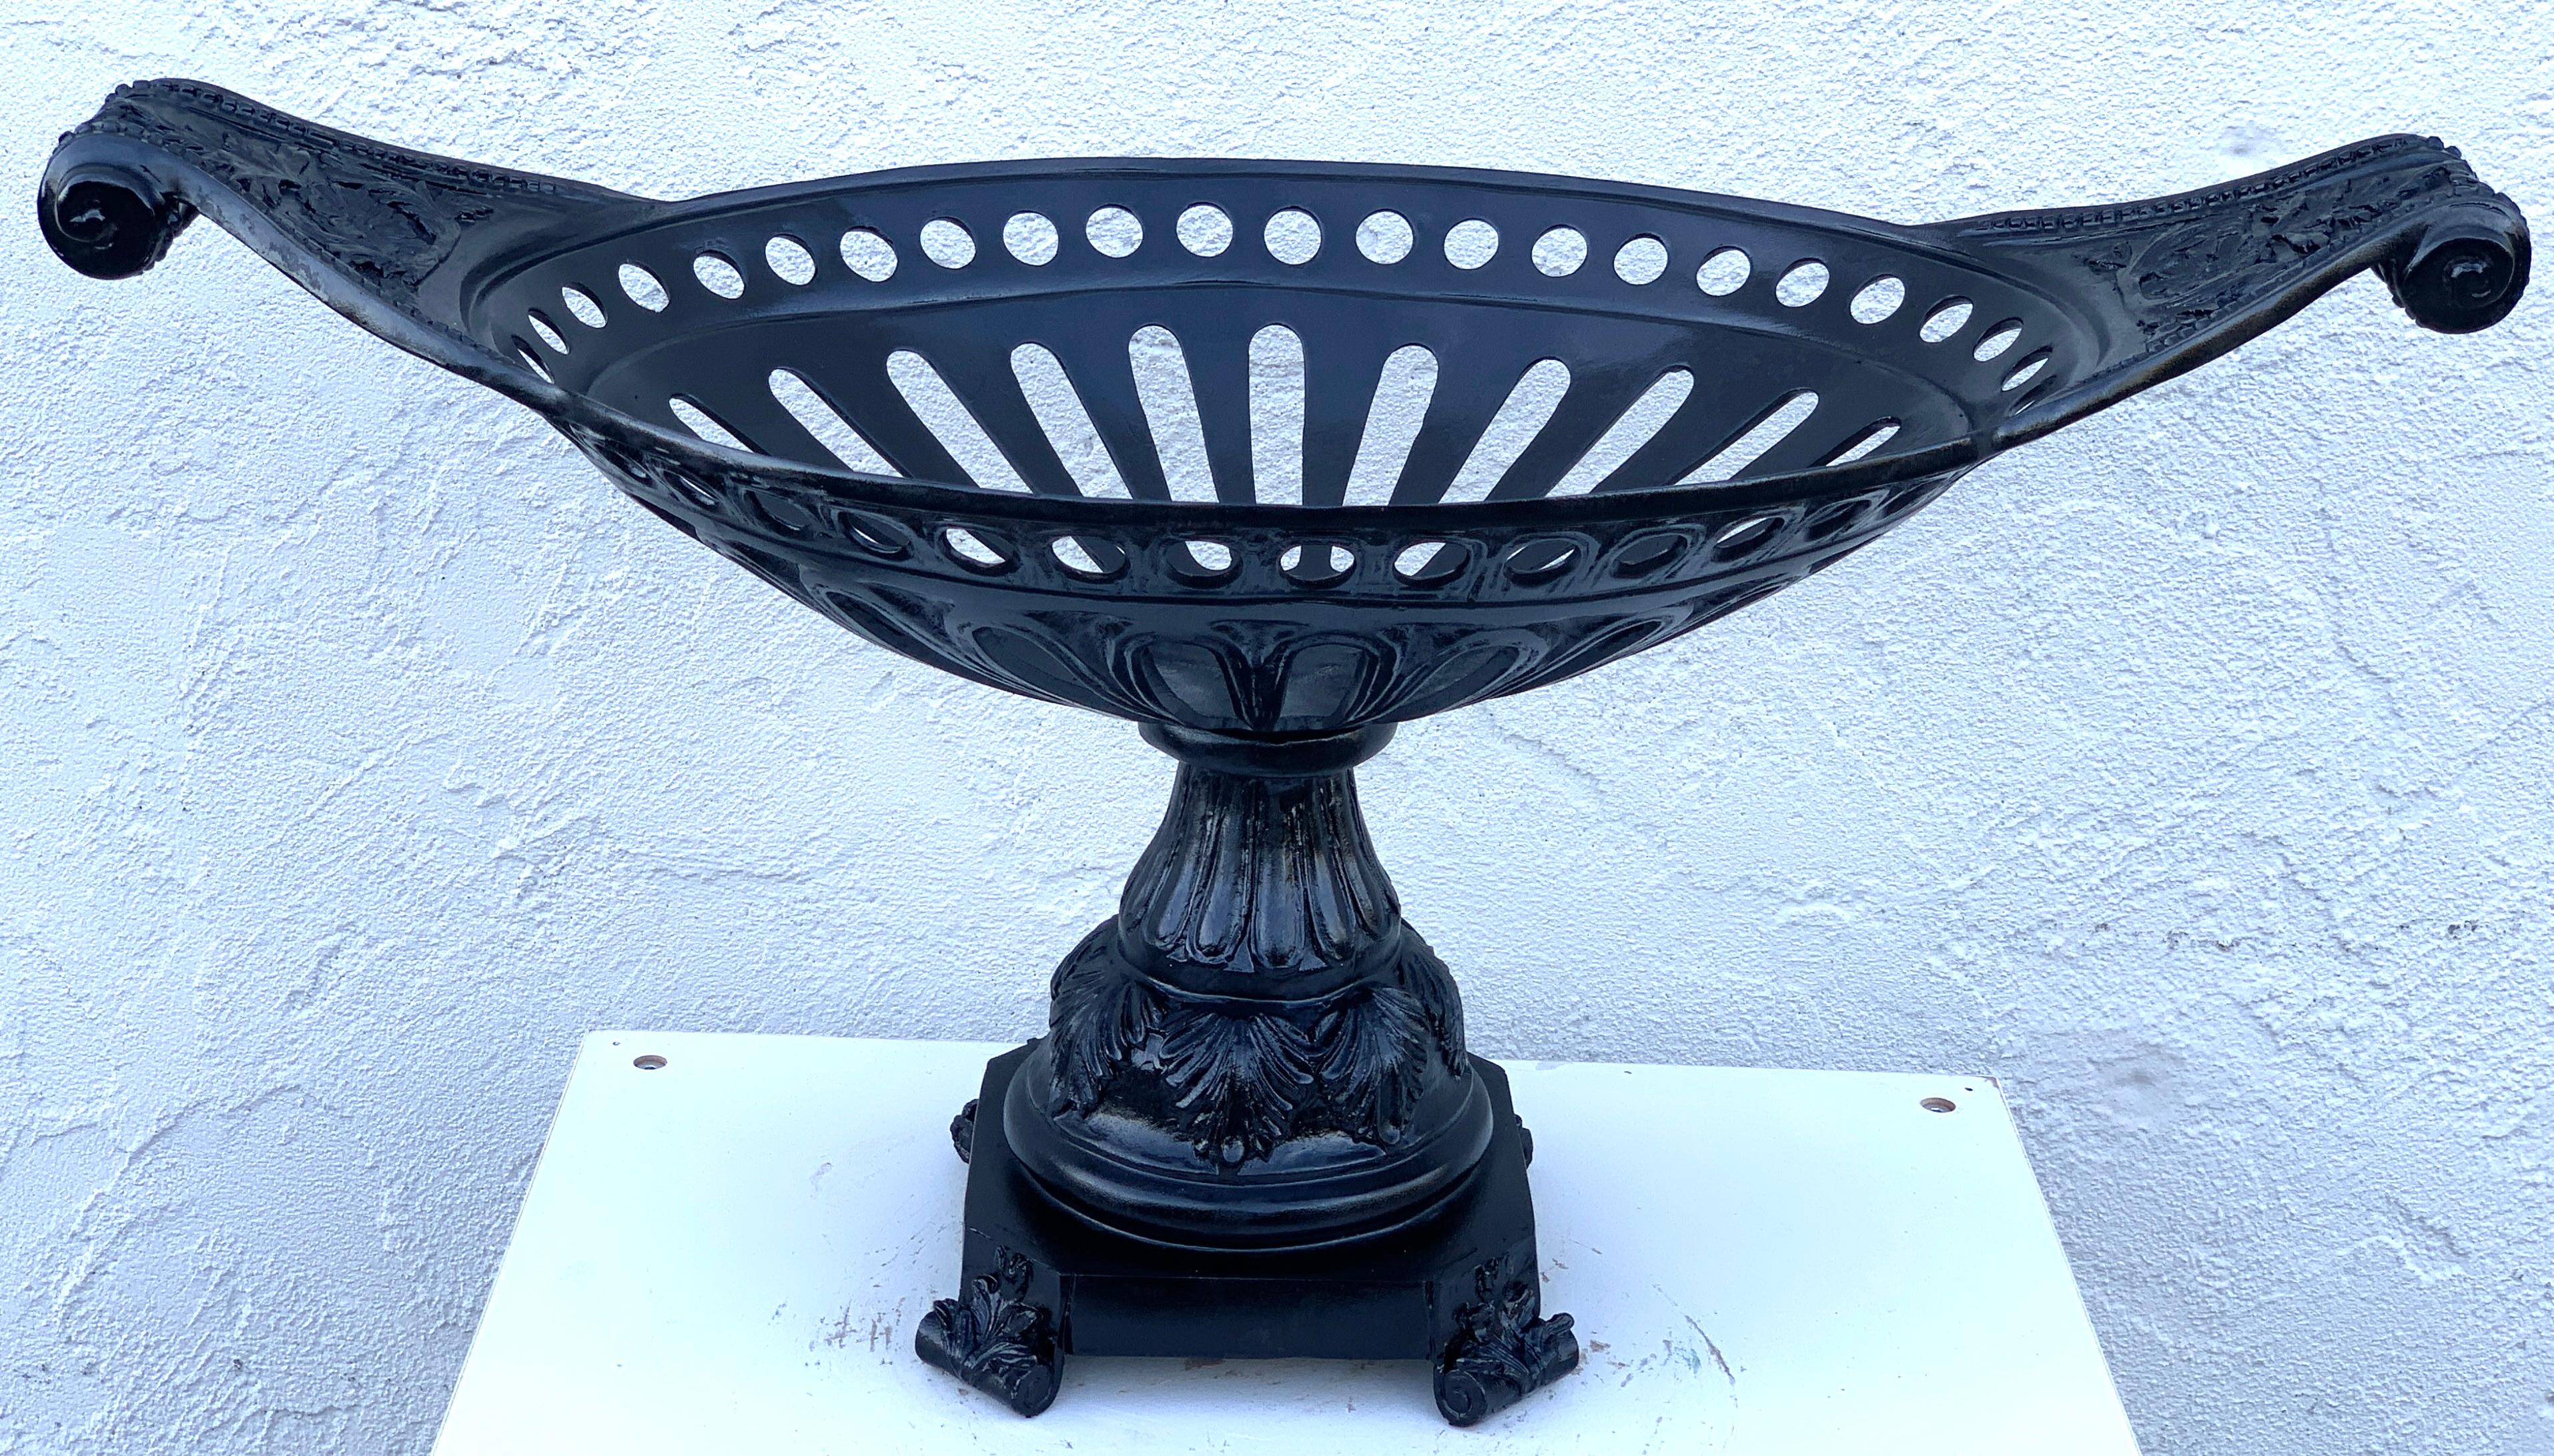 Maitland-Smith neoclassic garden centrepiece, Provenance Celine Dion, blackened bronze pierced oval centrepiece, with an interior circumference of 20